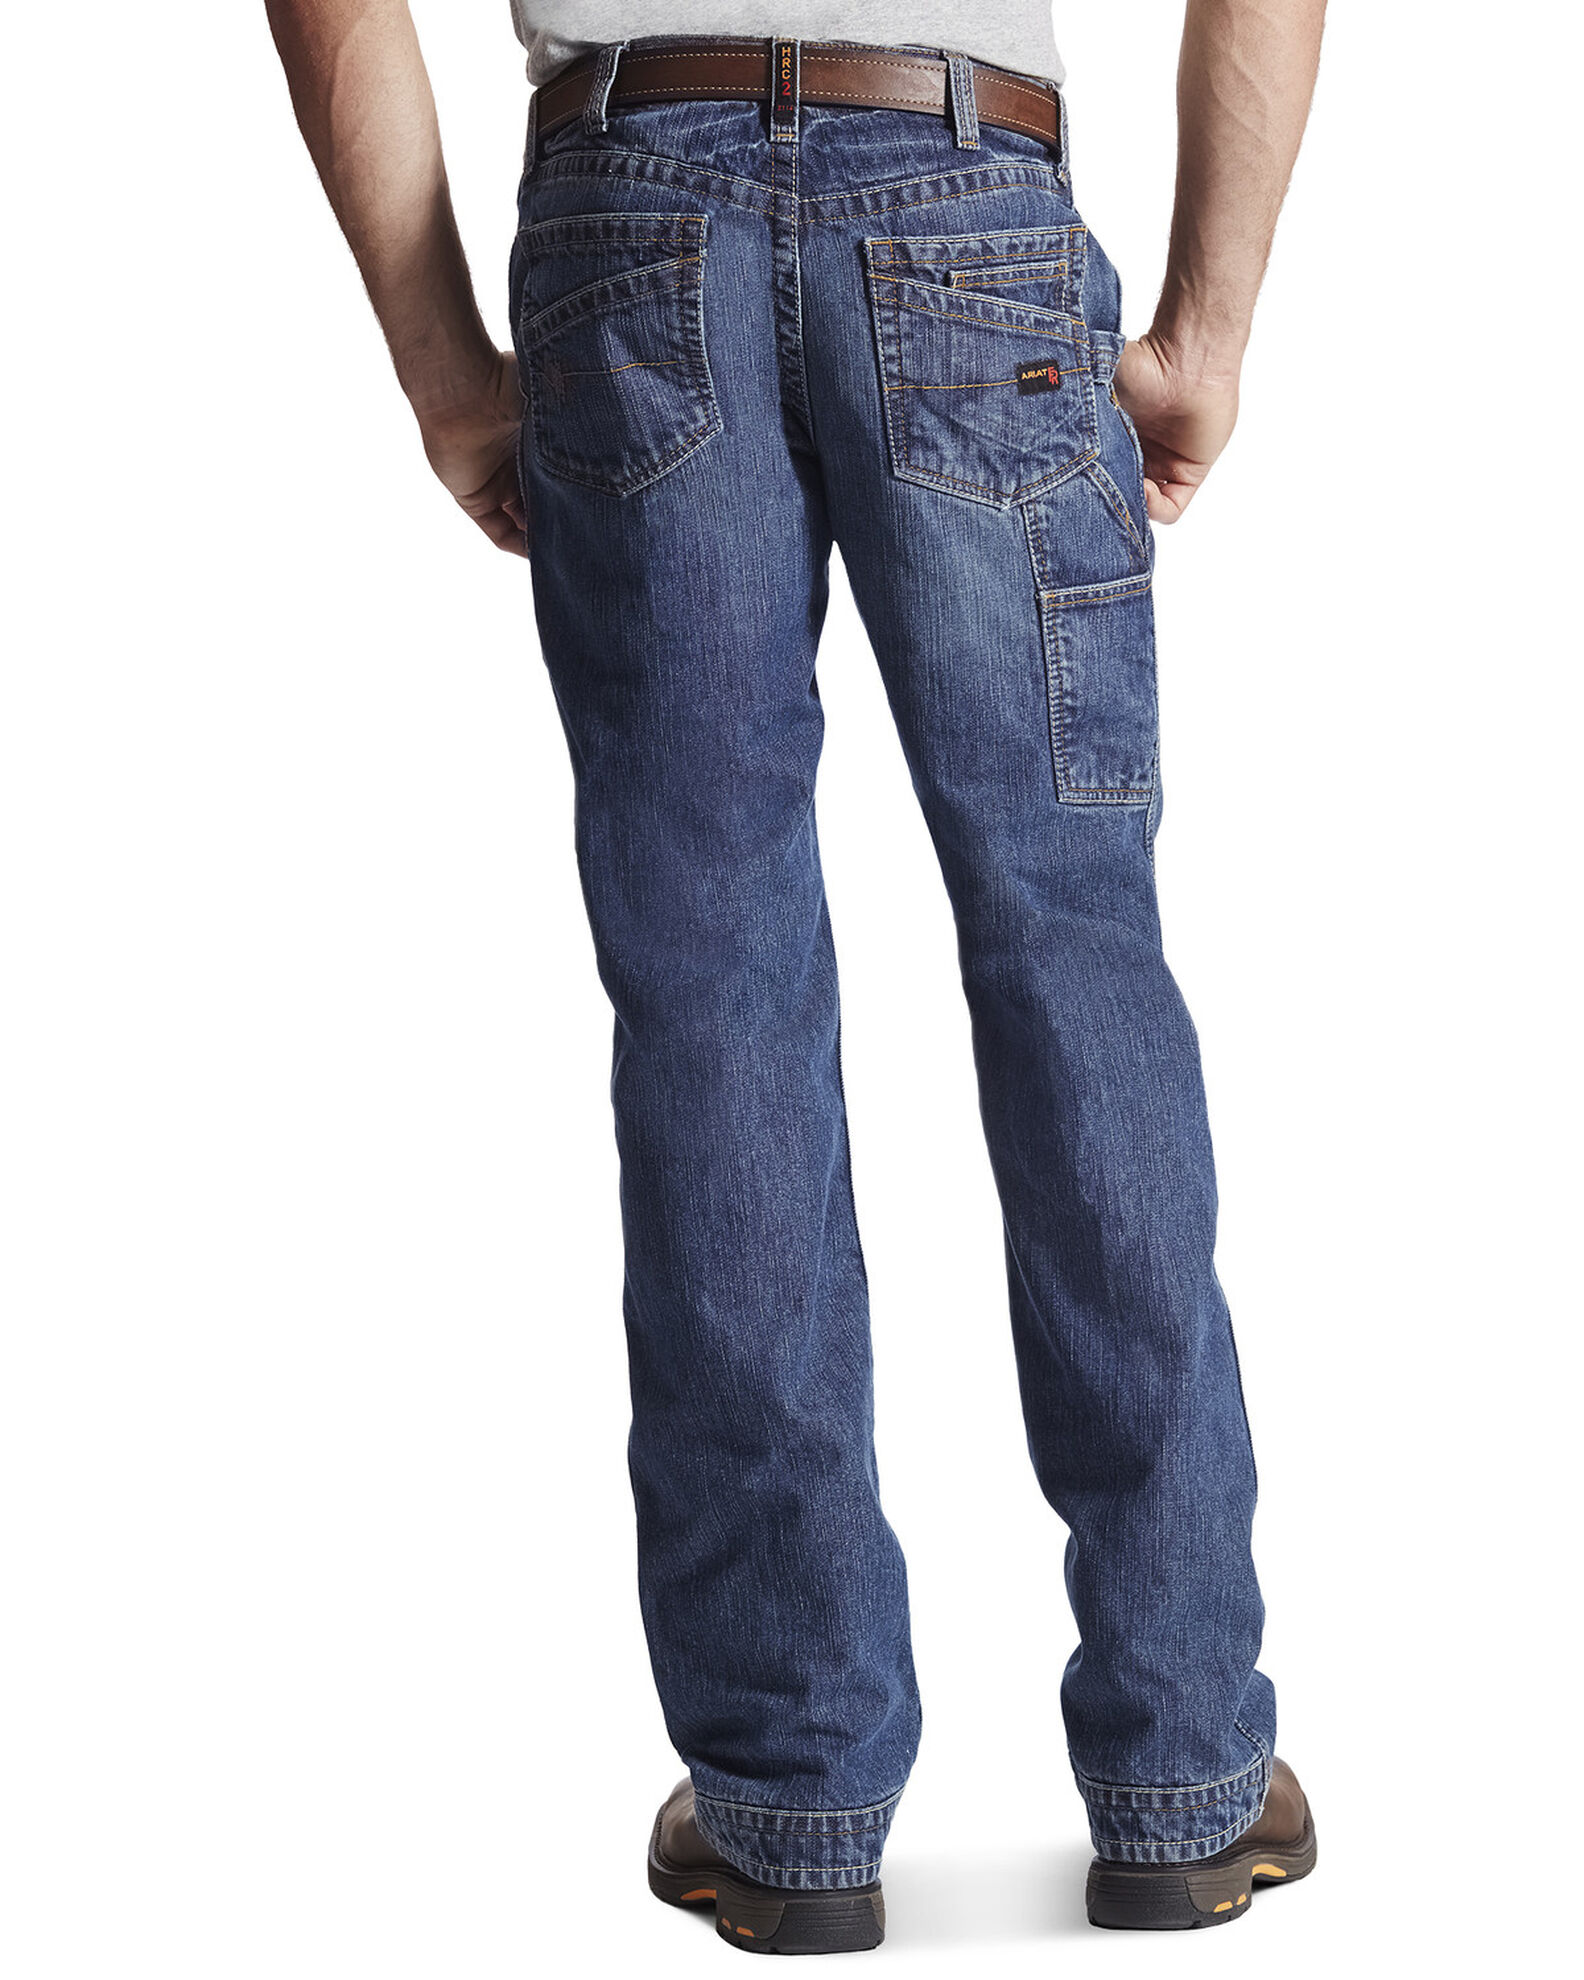 Product Name: Ariat Men's FR M4 Workhorse Relaxed Fit Pants